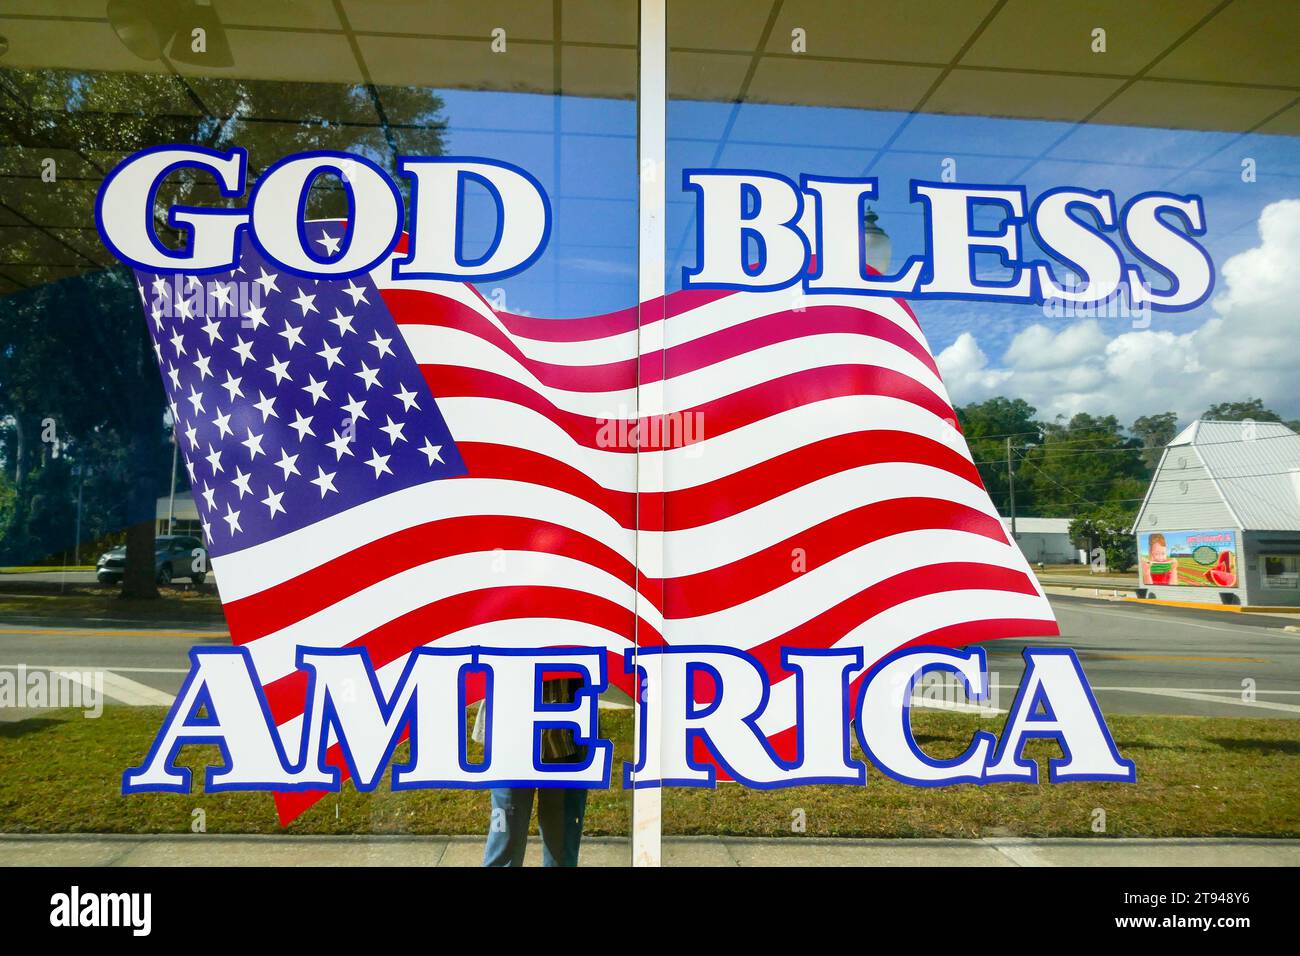 God Bless America sign & flag on window of a local store in a small North Florida town. Stock Photo